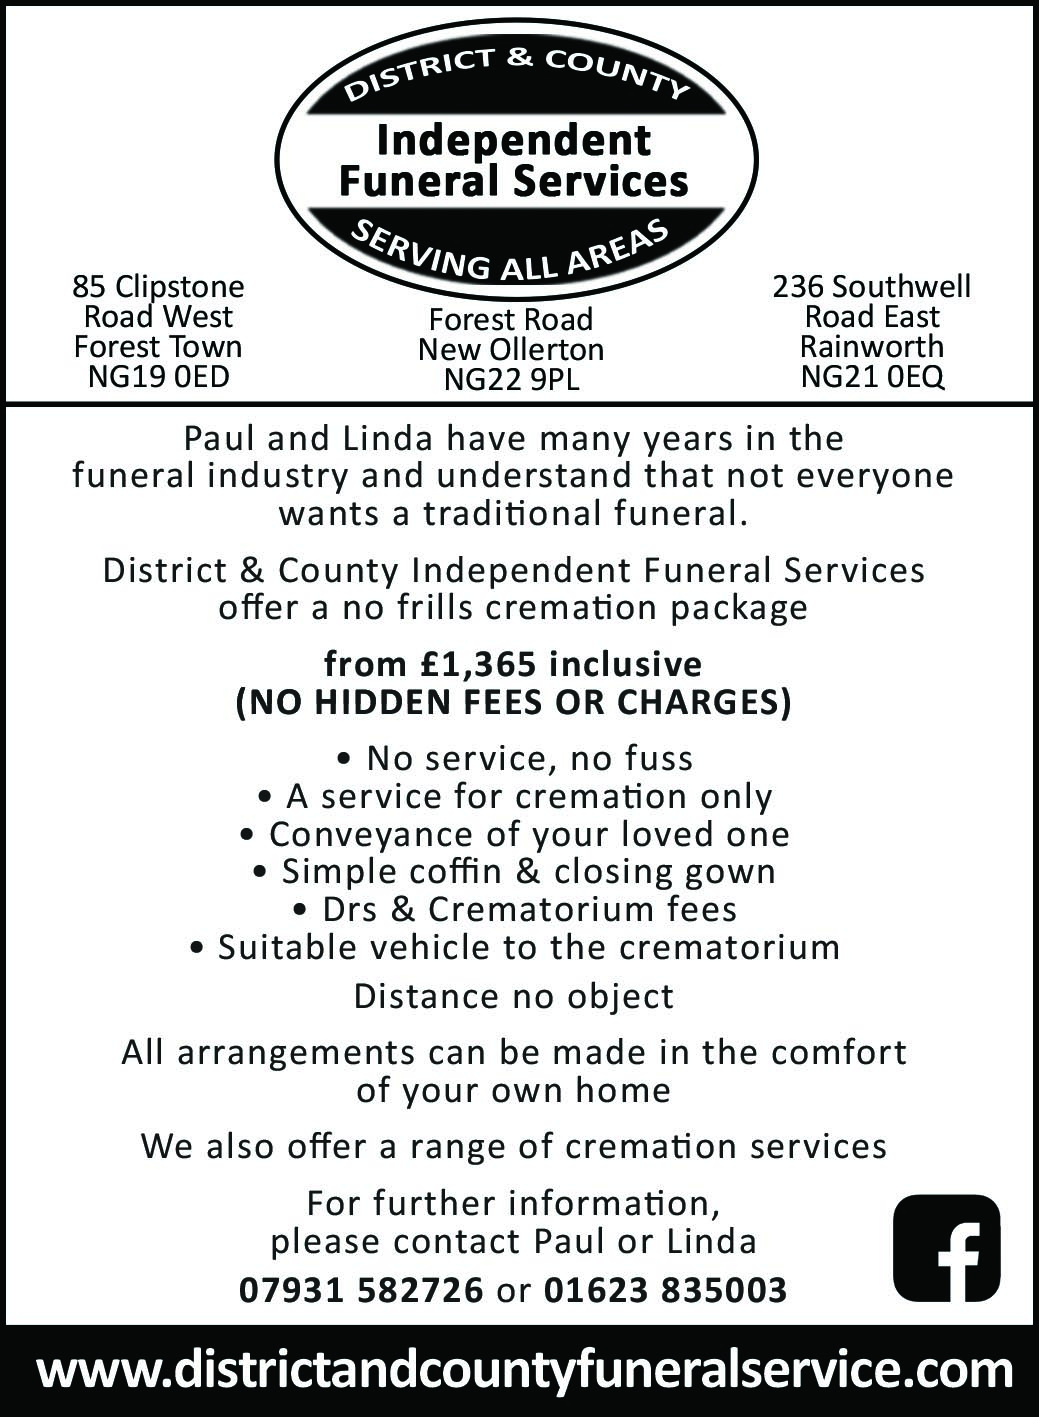 District & County Funeral Services